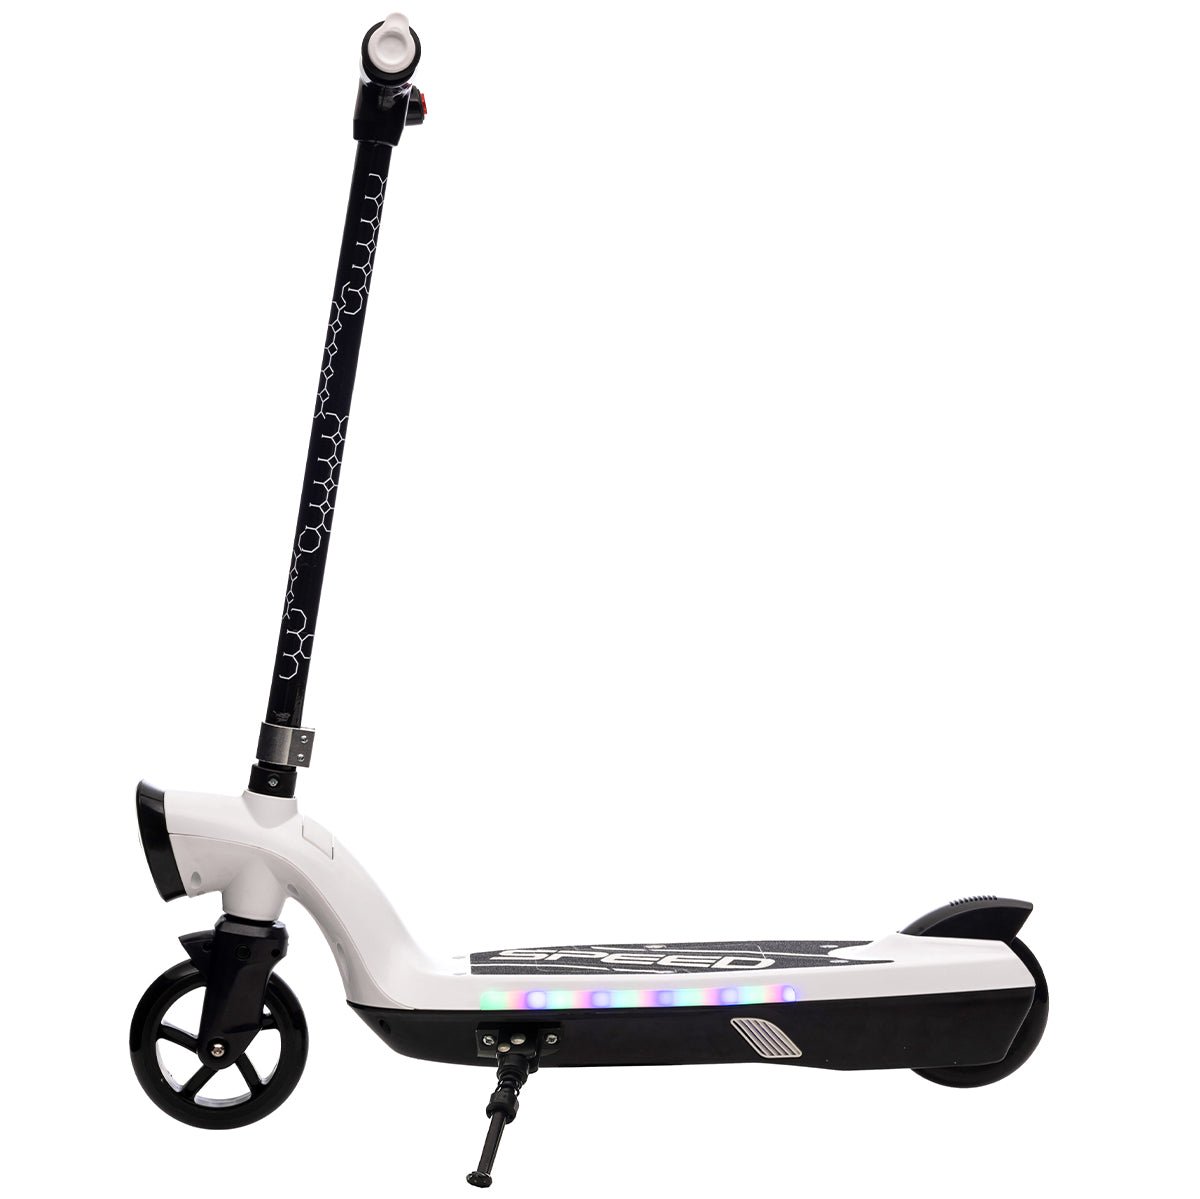 Renegade Strobe 12V Electric Ride On Scooter with Lights